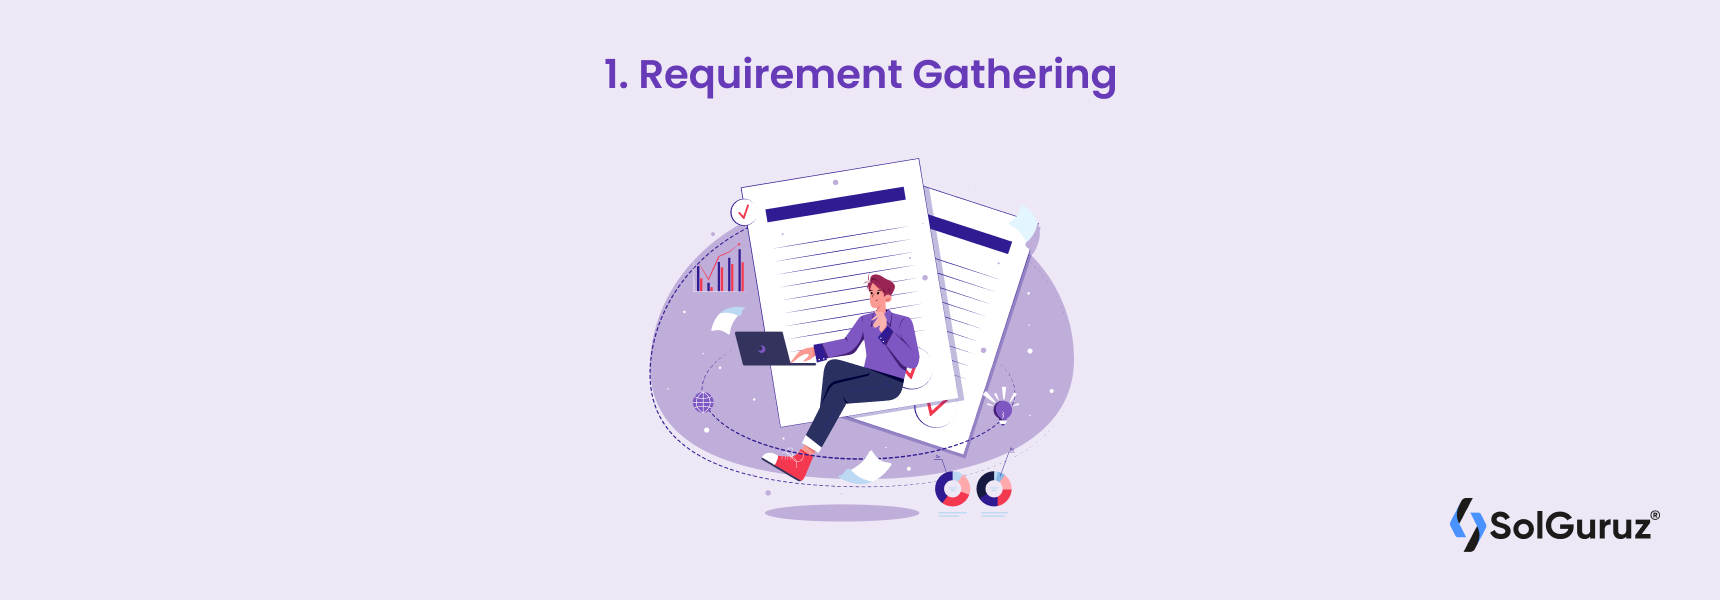 Requirement Gathering is the first in the Custom App Development process